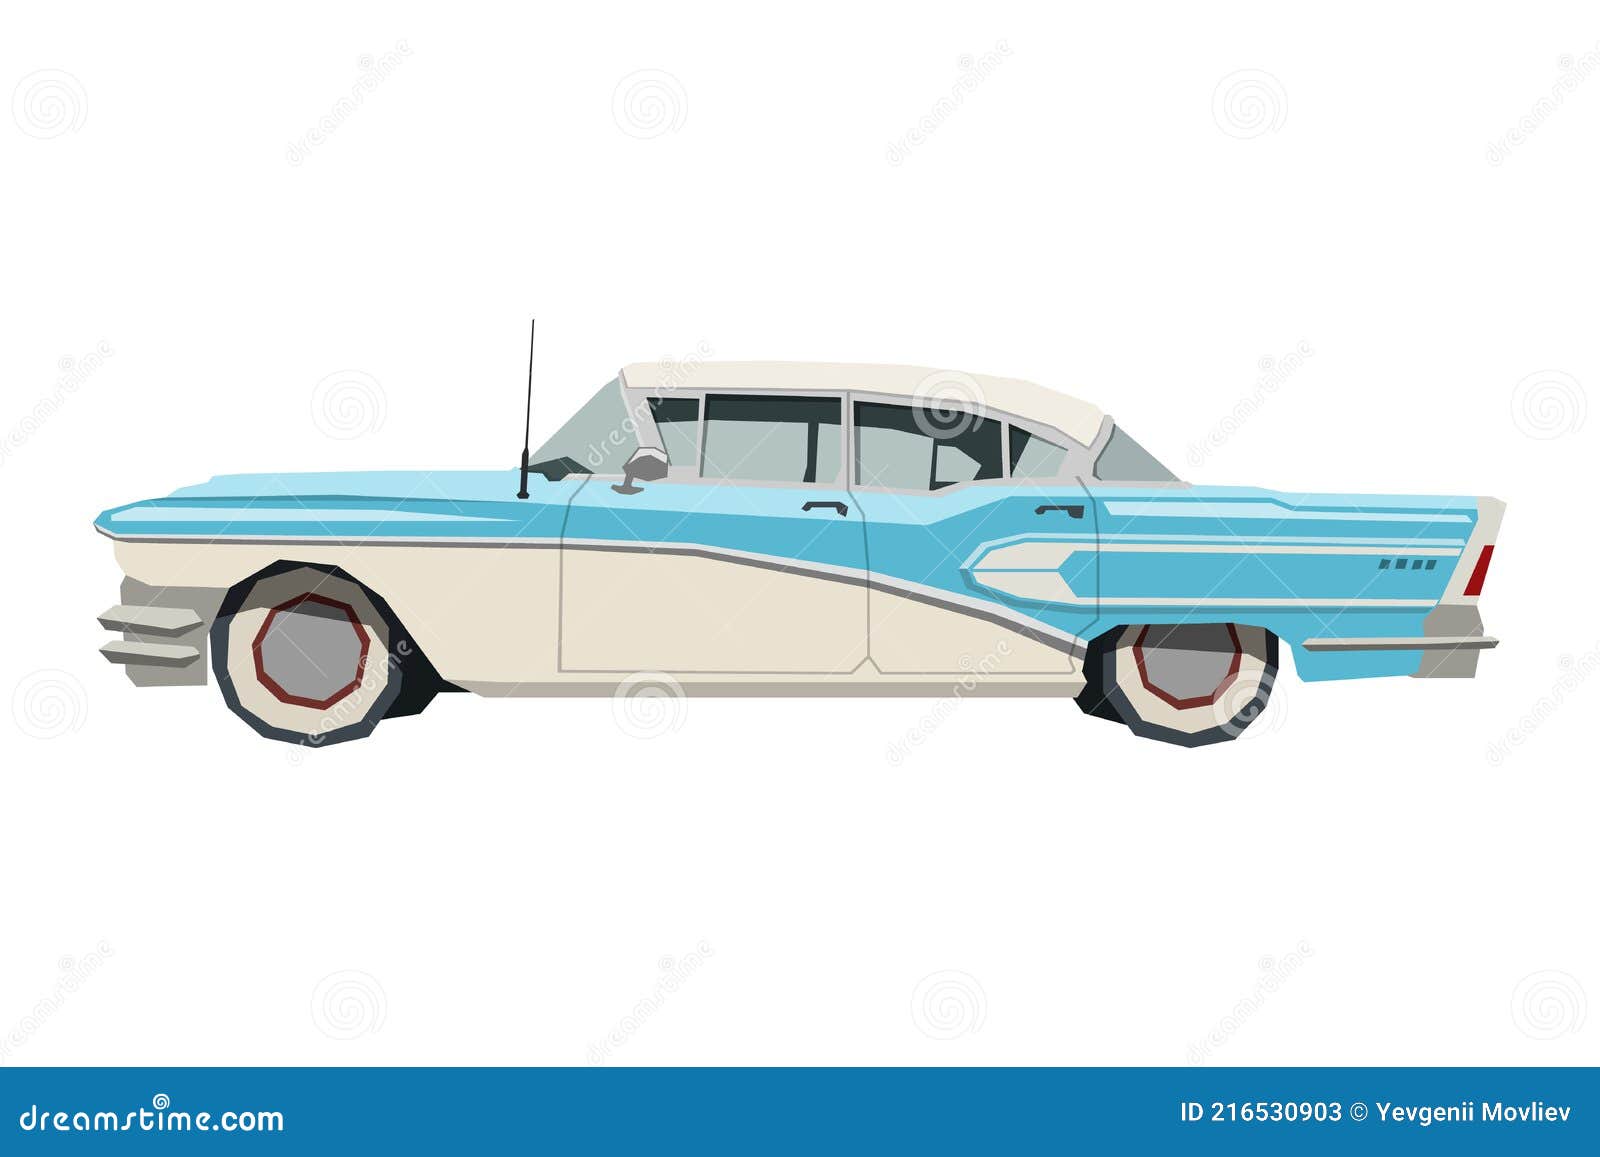 Nursery Retro Car Drawing. Vintage Car in Cartoon Style. Isolated Vehicle  Print for Kids Game Room Decor Stock Vector - Illustration of retro, antique:  216530903